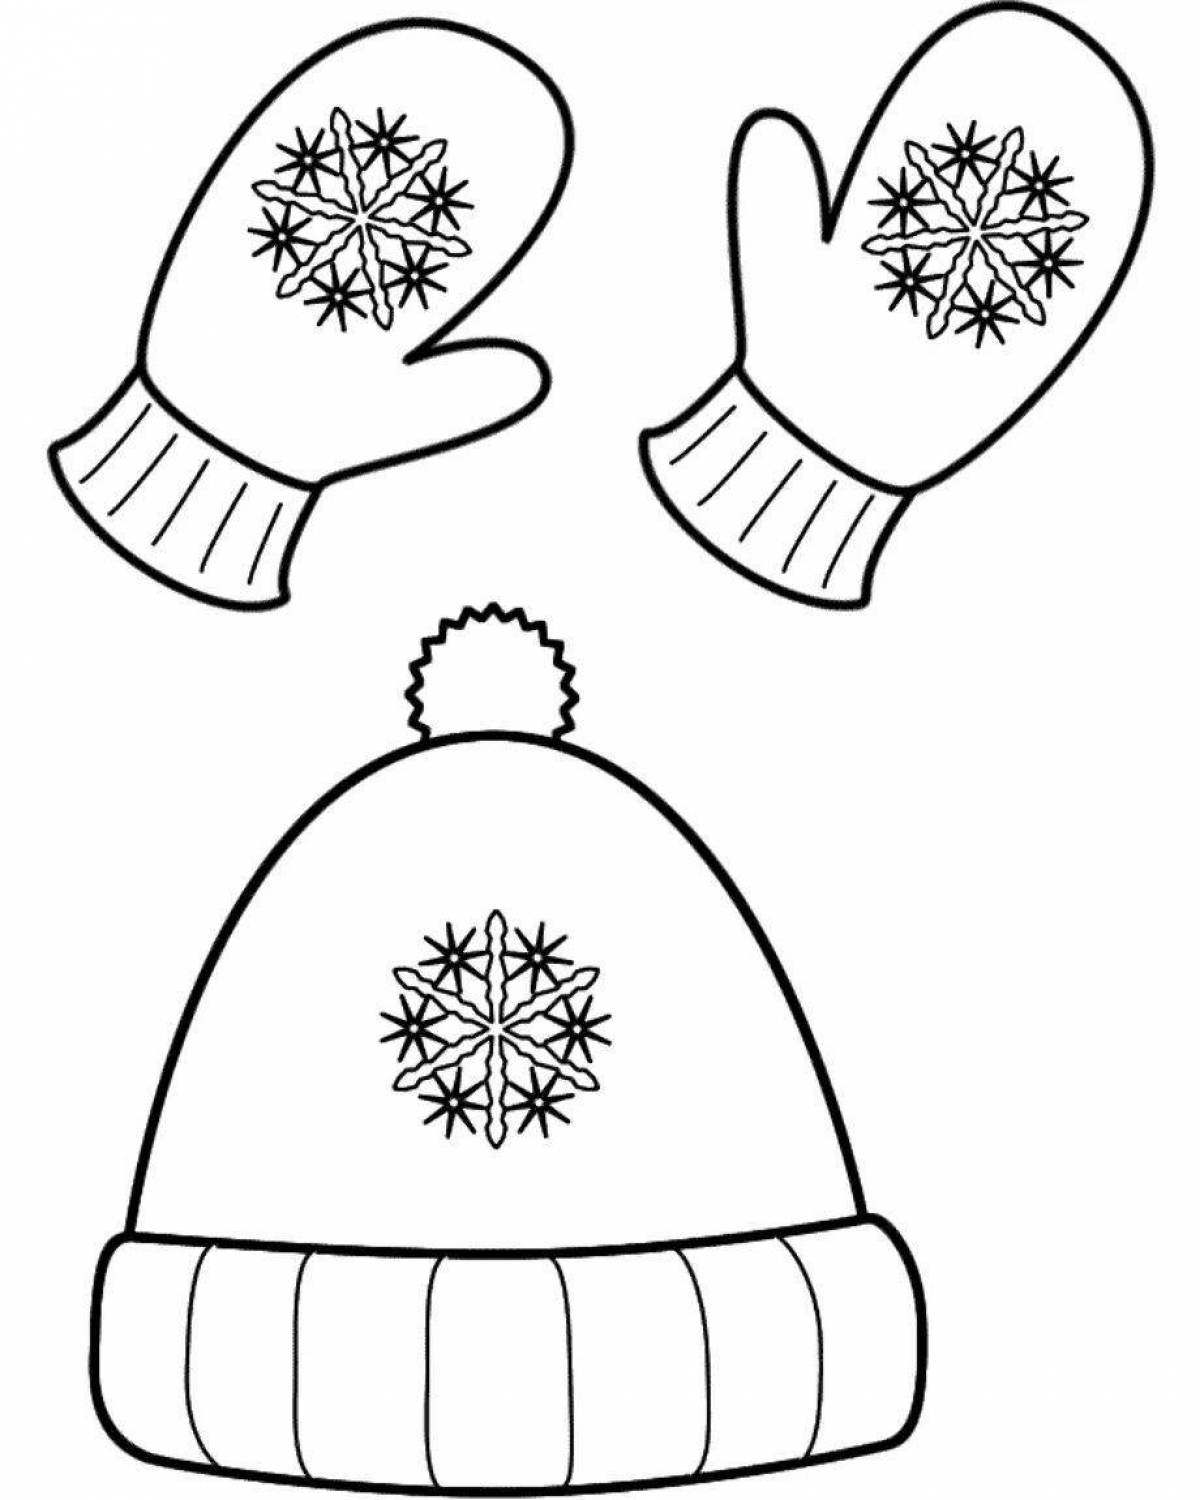 Christmas hat style coloring book